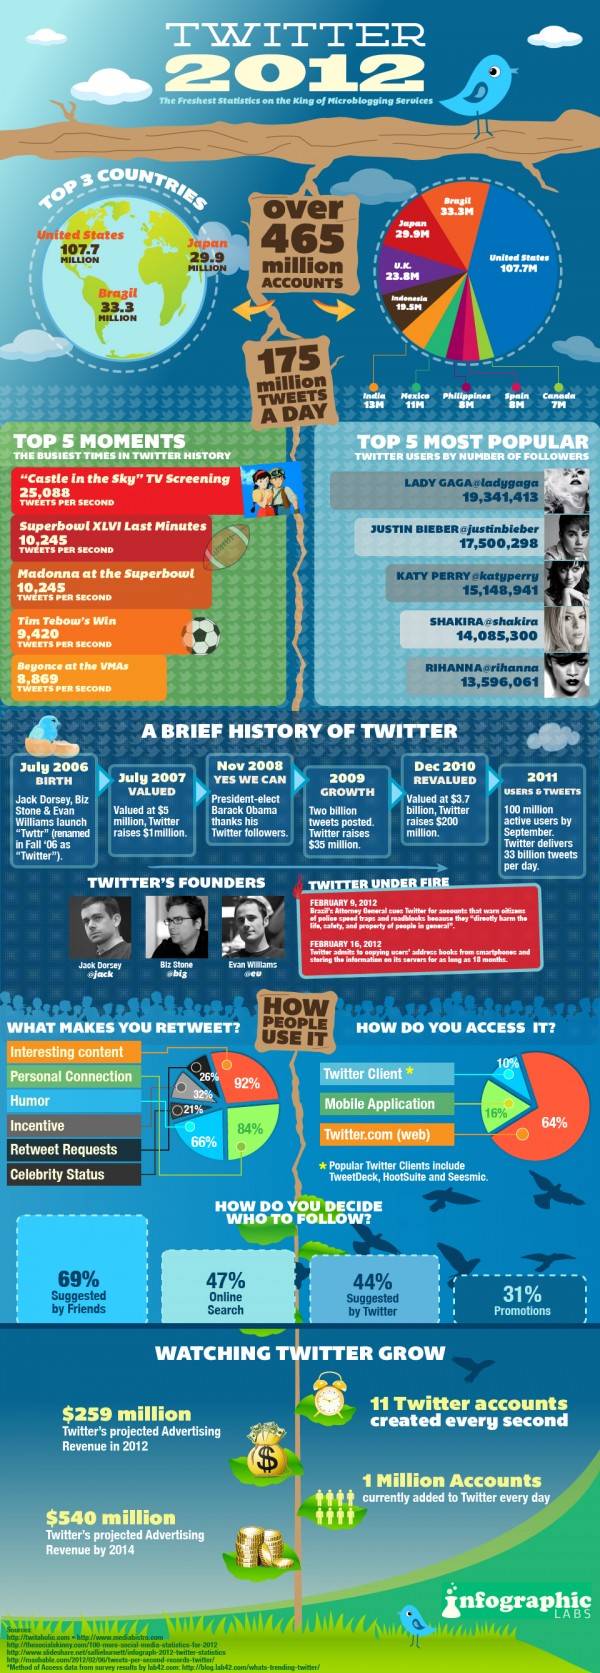 Infographie Twitter 2012